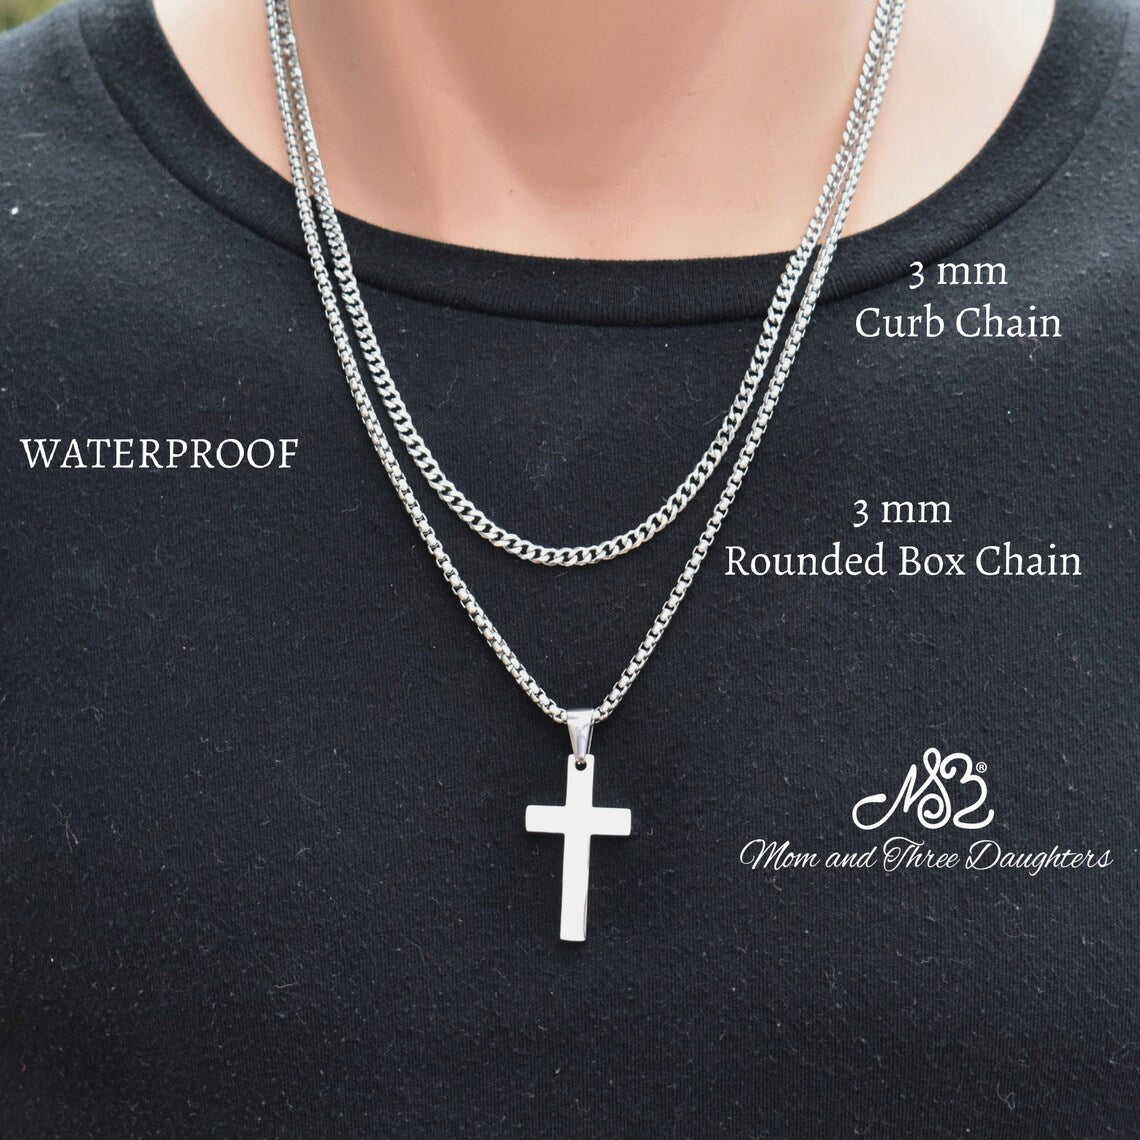 Mprainbow Double Layer Cross Black Cross Pendant For Men Waterproof  Stainless Steel Religious Collar With Gift Box Chain 50/55/60/70cm From  Fengyune, $6.44 | DHgate.Com